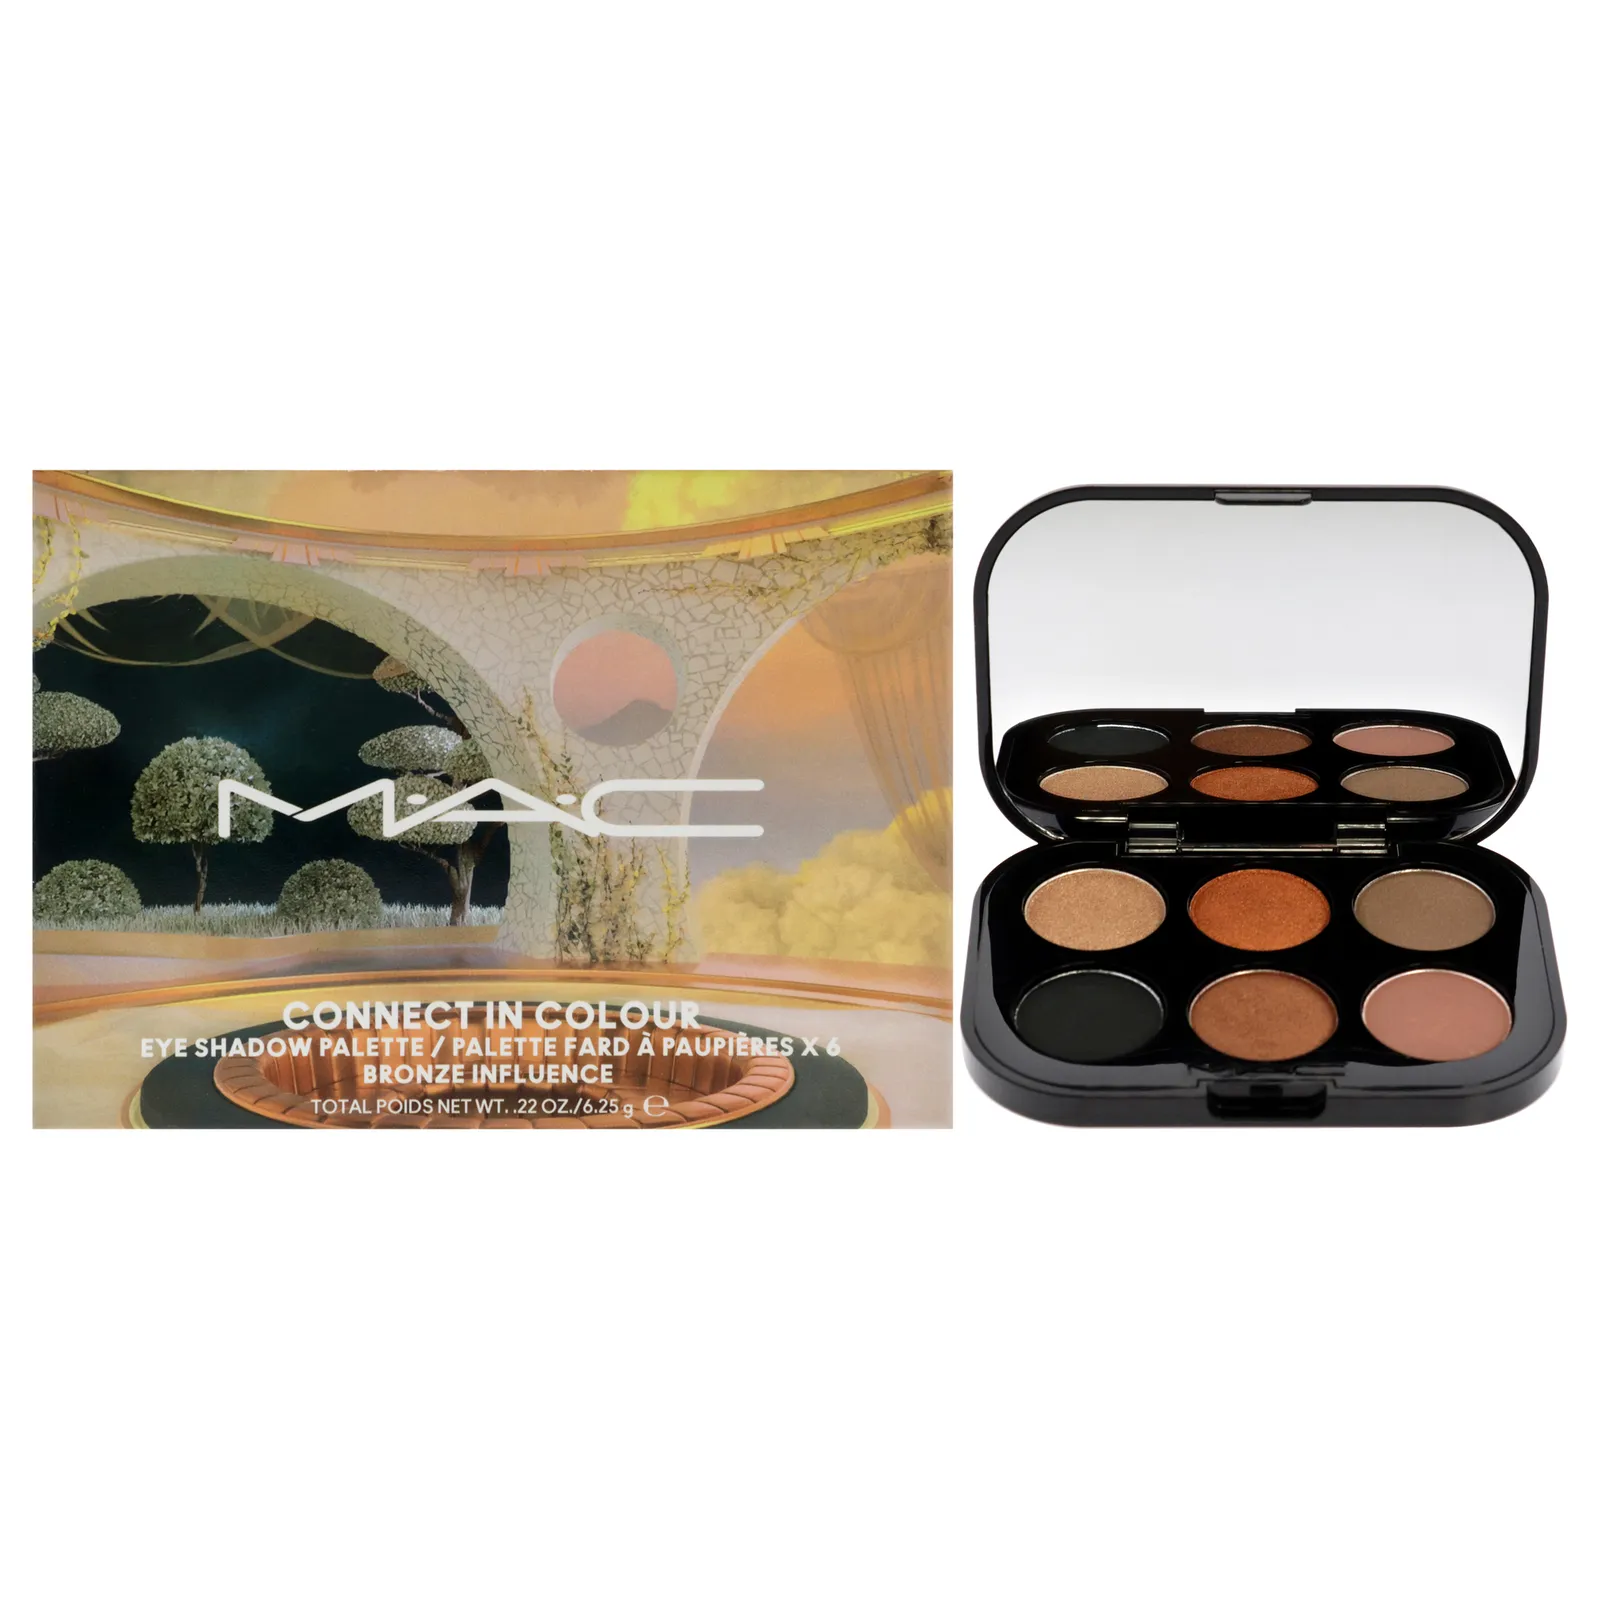 Connect In Colour Eye Shadow Palette - Bronze Influence by MAC for Women... - $38.00